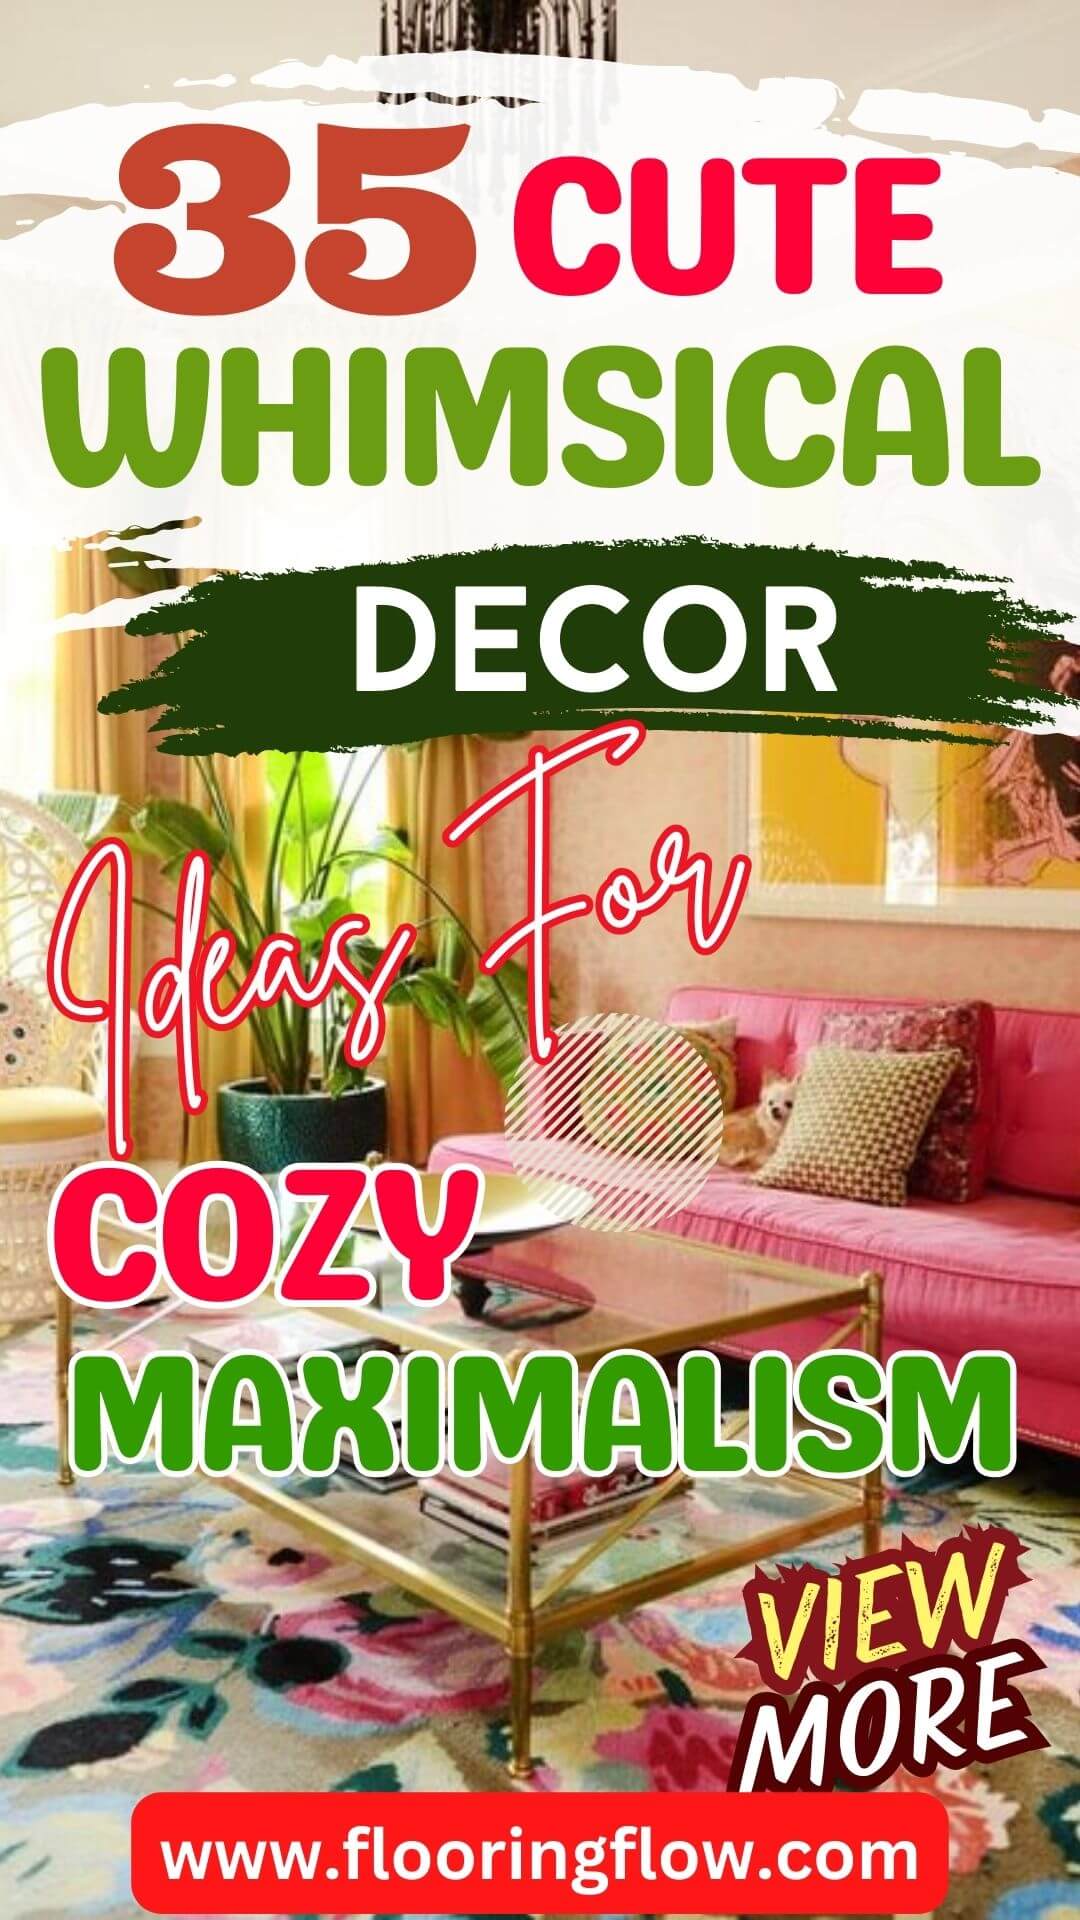 Whimsical Decor Ideas for Cozy Maximalism